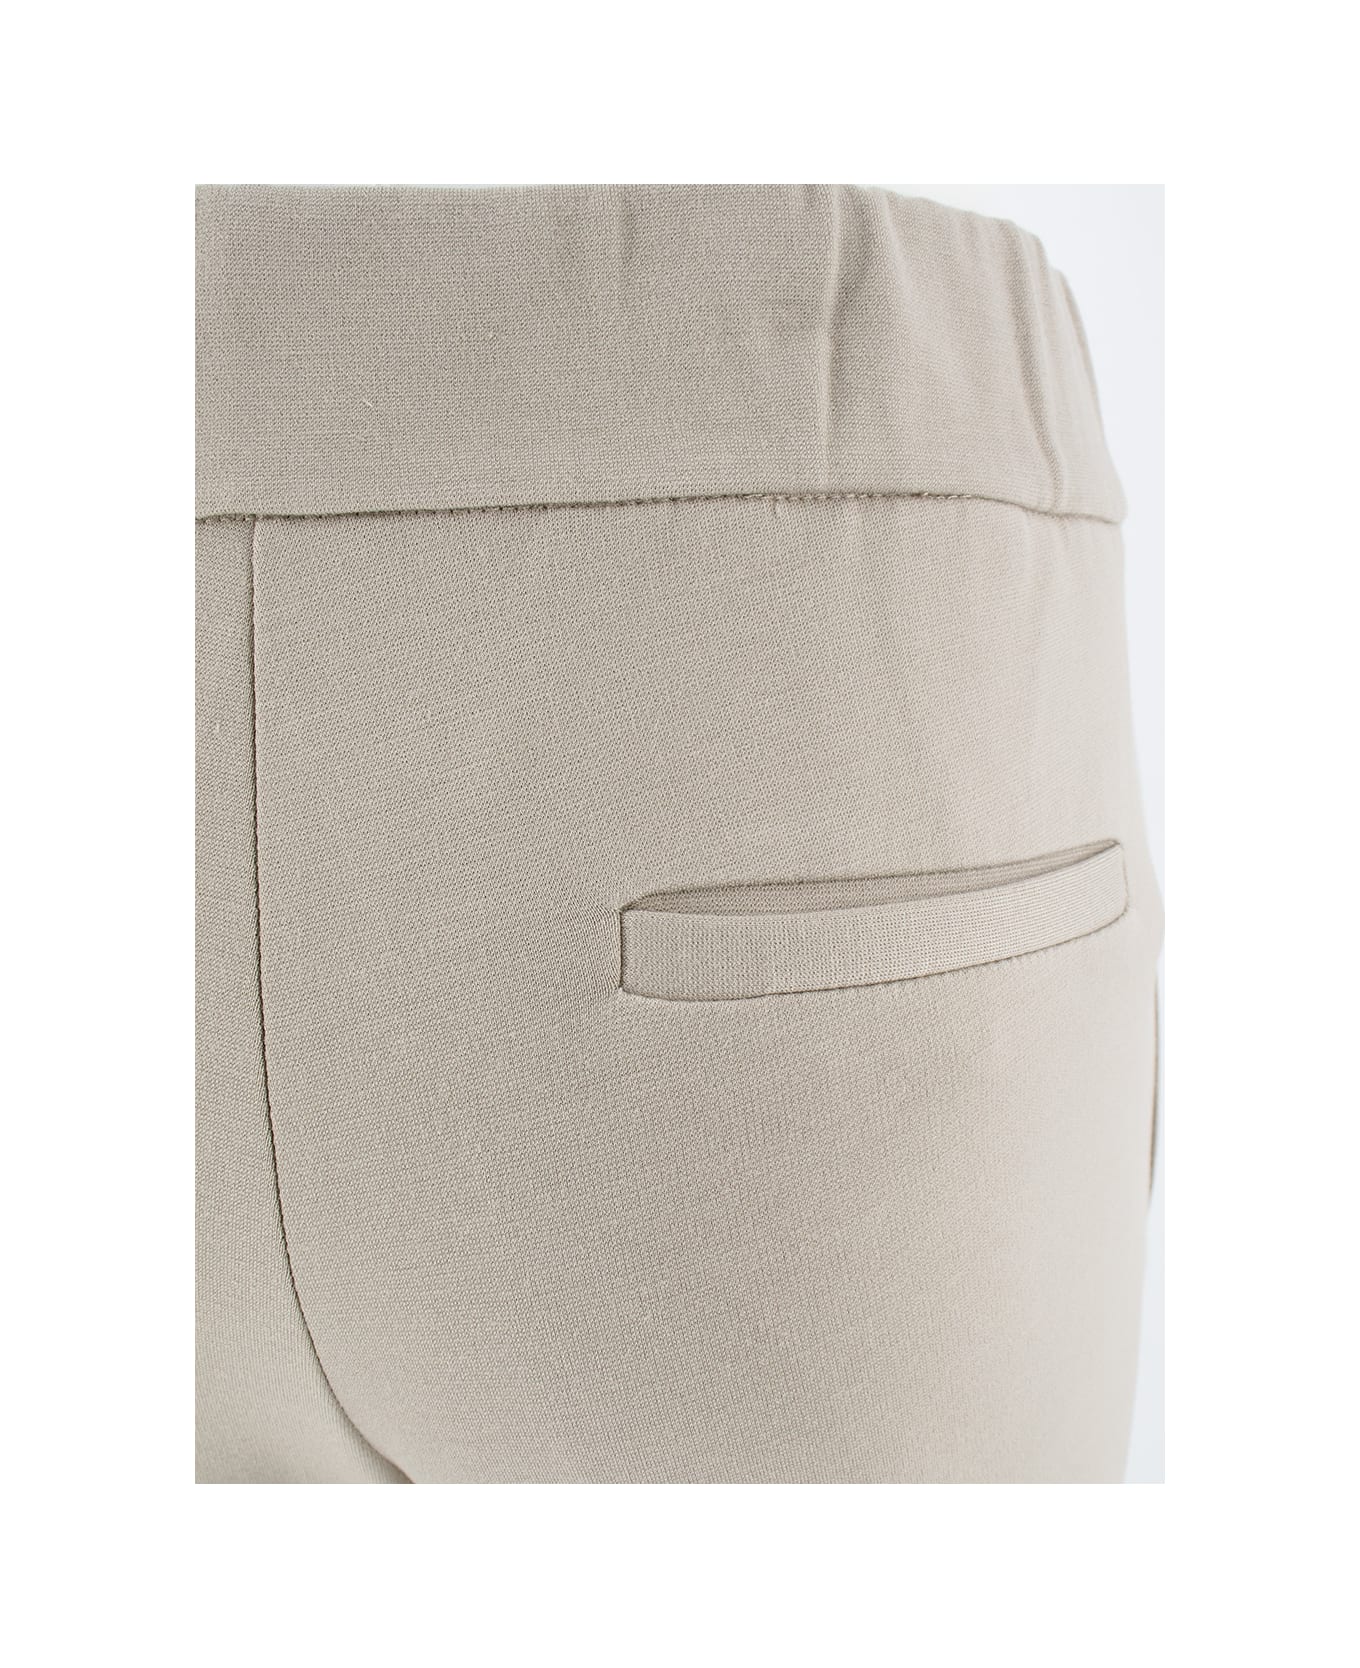 Le Tricot Perugia Trousers - TAUPE                ボトムス